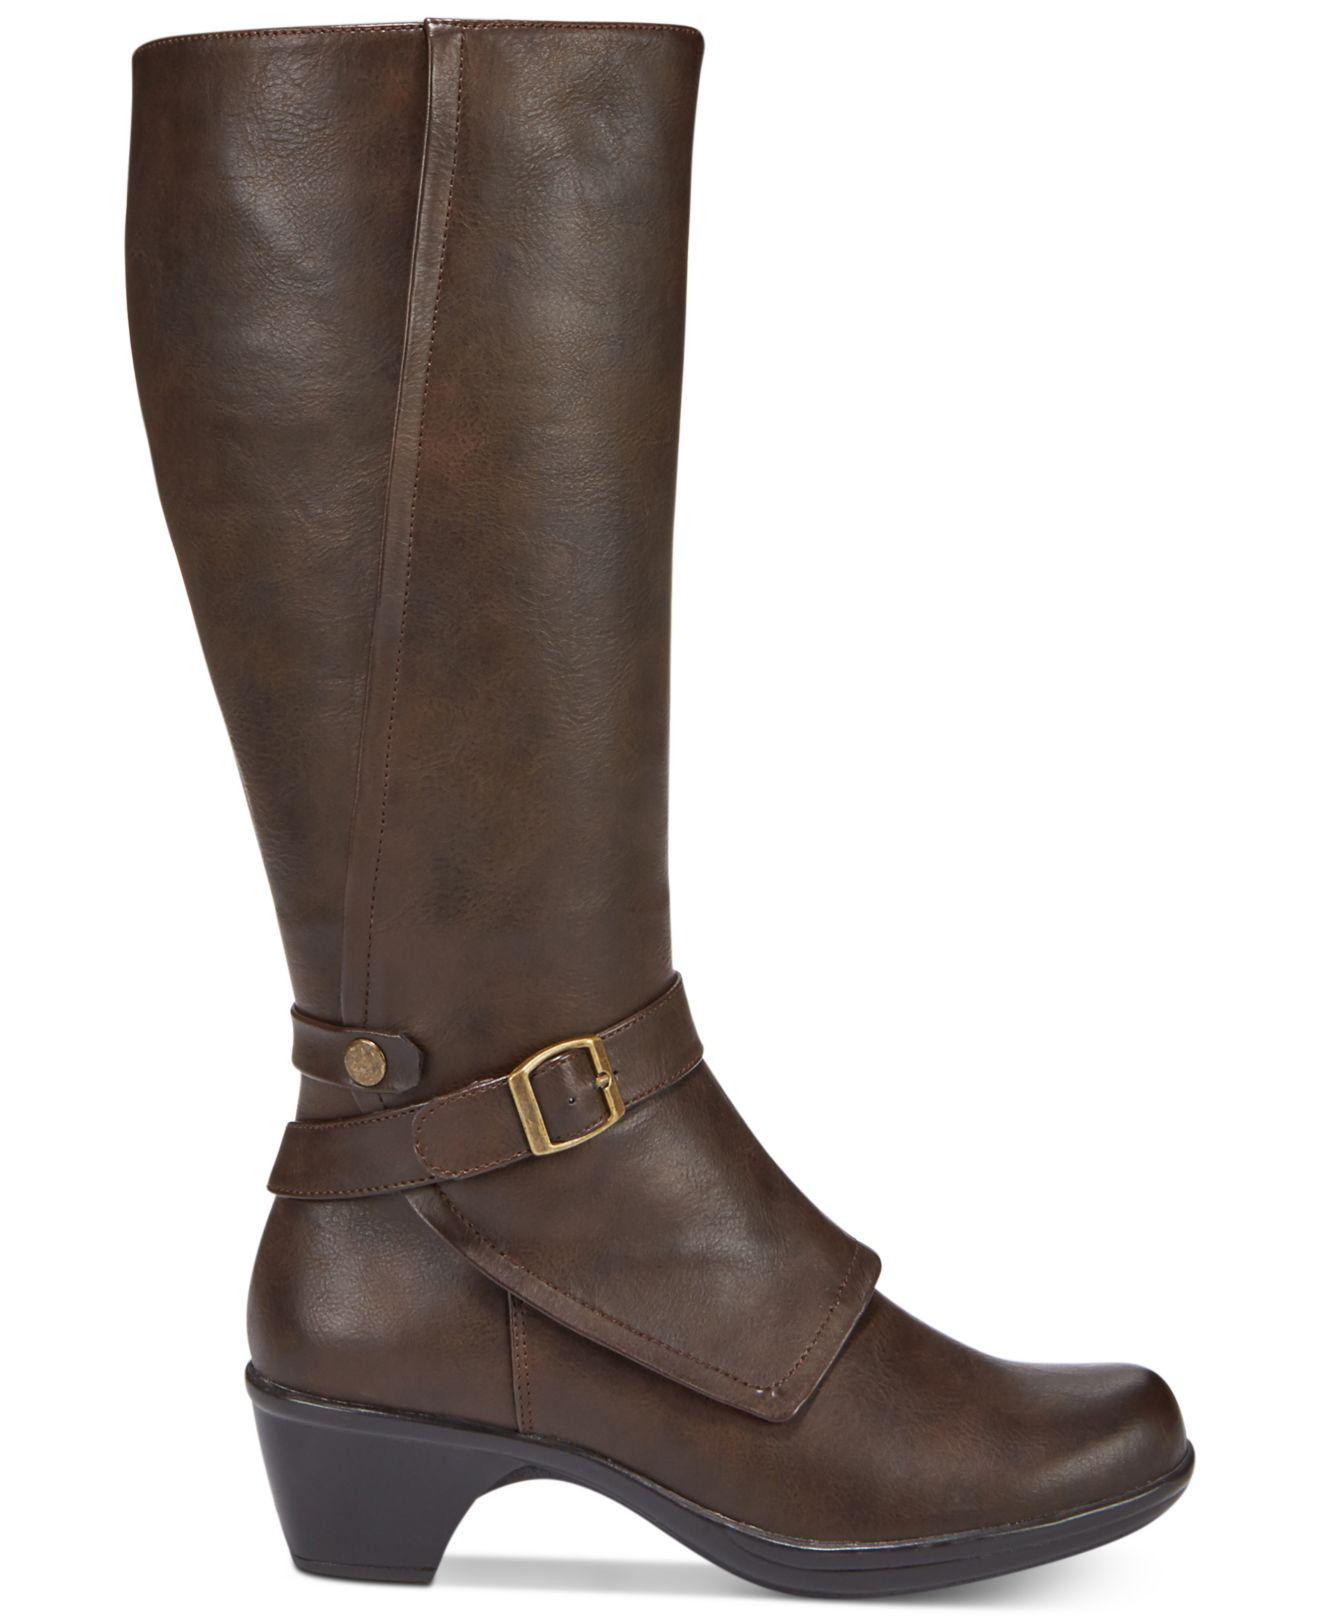 Easy Street Jan Riding Boots in Brown - Lyst